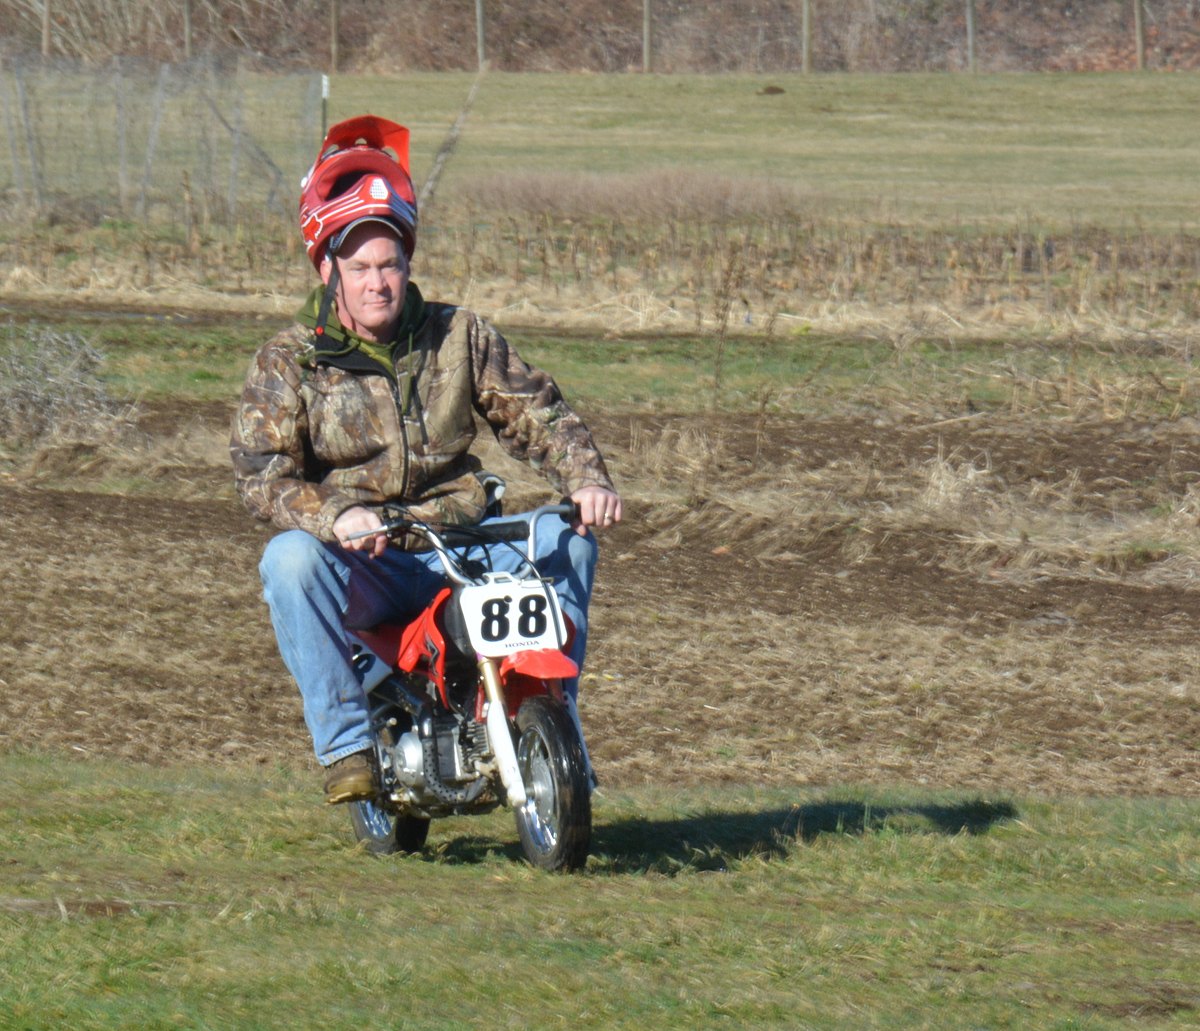 Need a bigger helmet - from the Dirt Biking with Miriam and Rodney photo gallery.